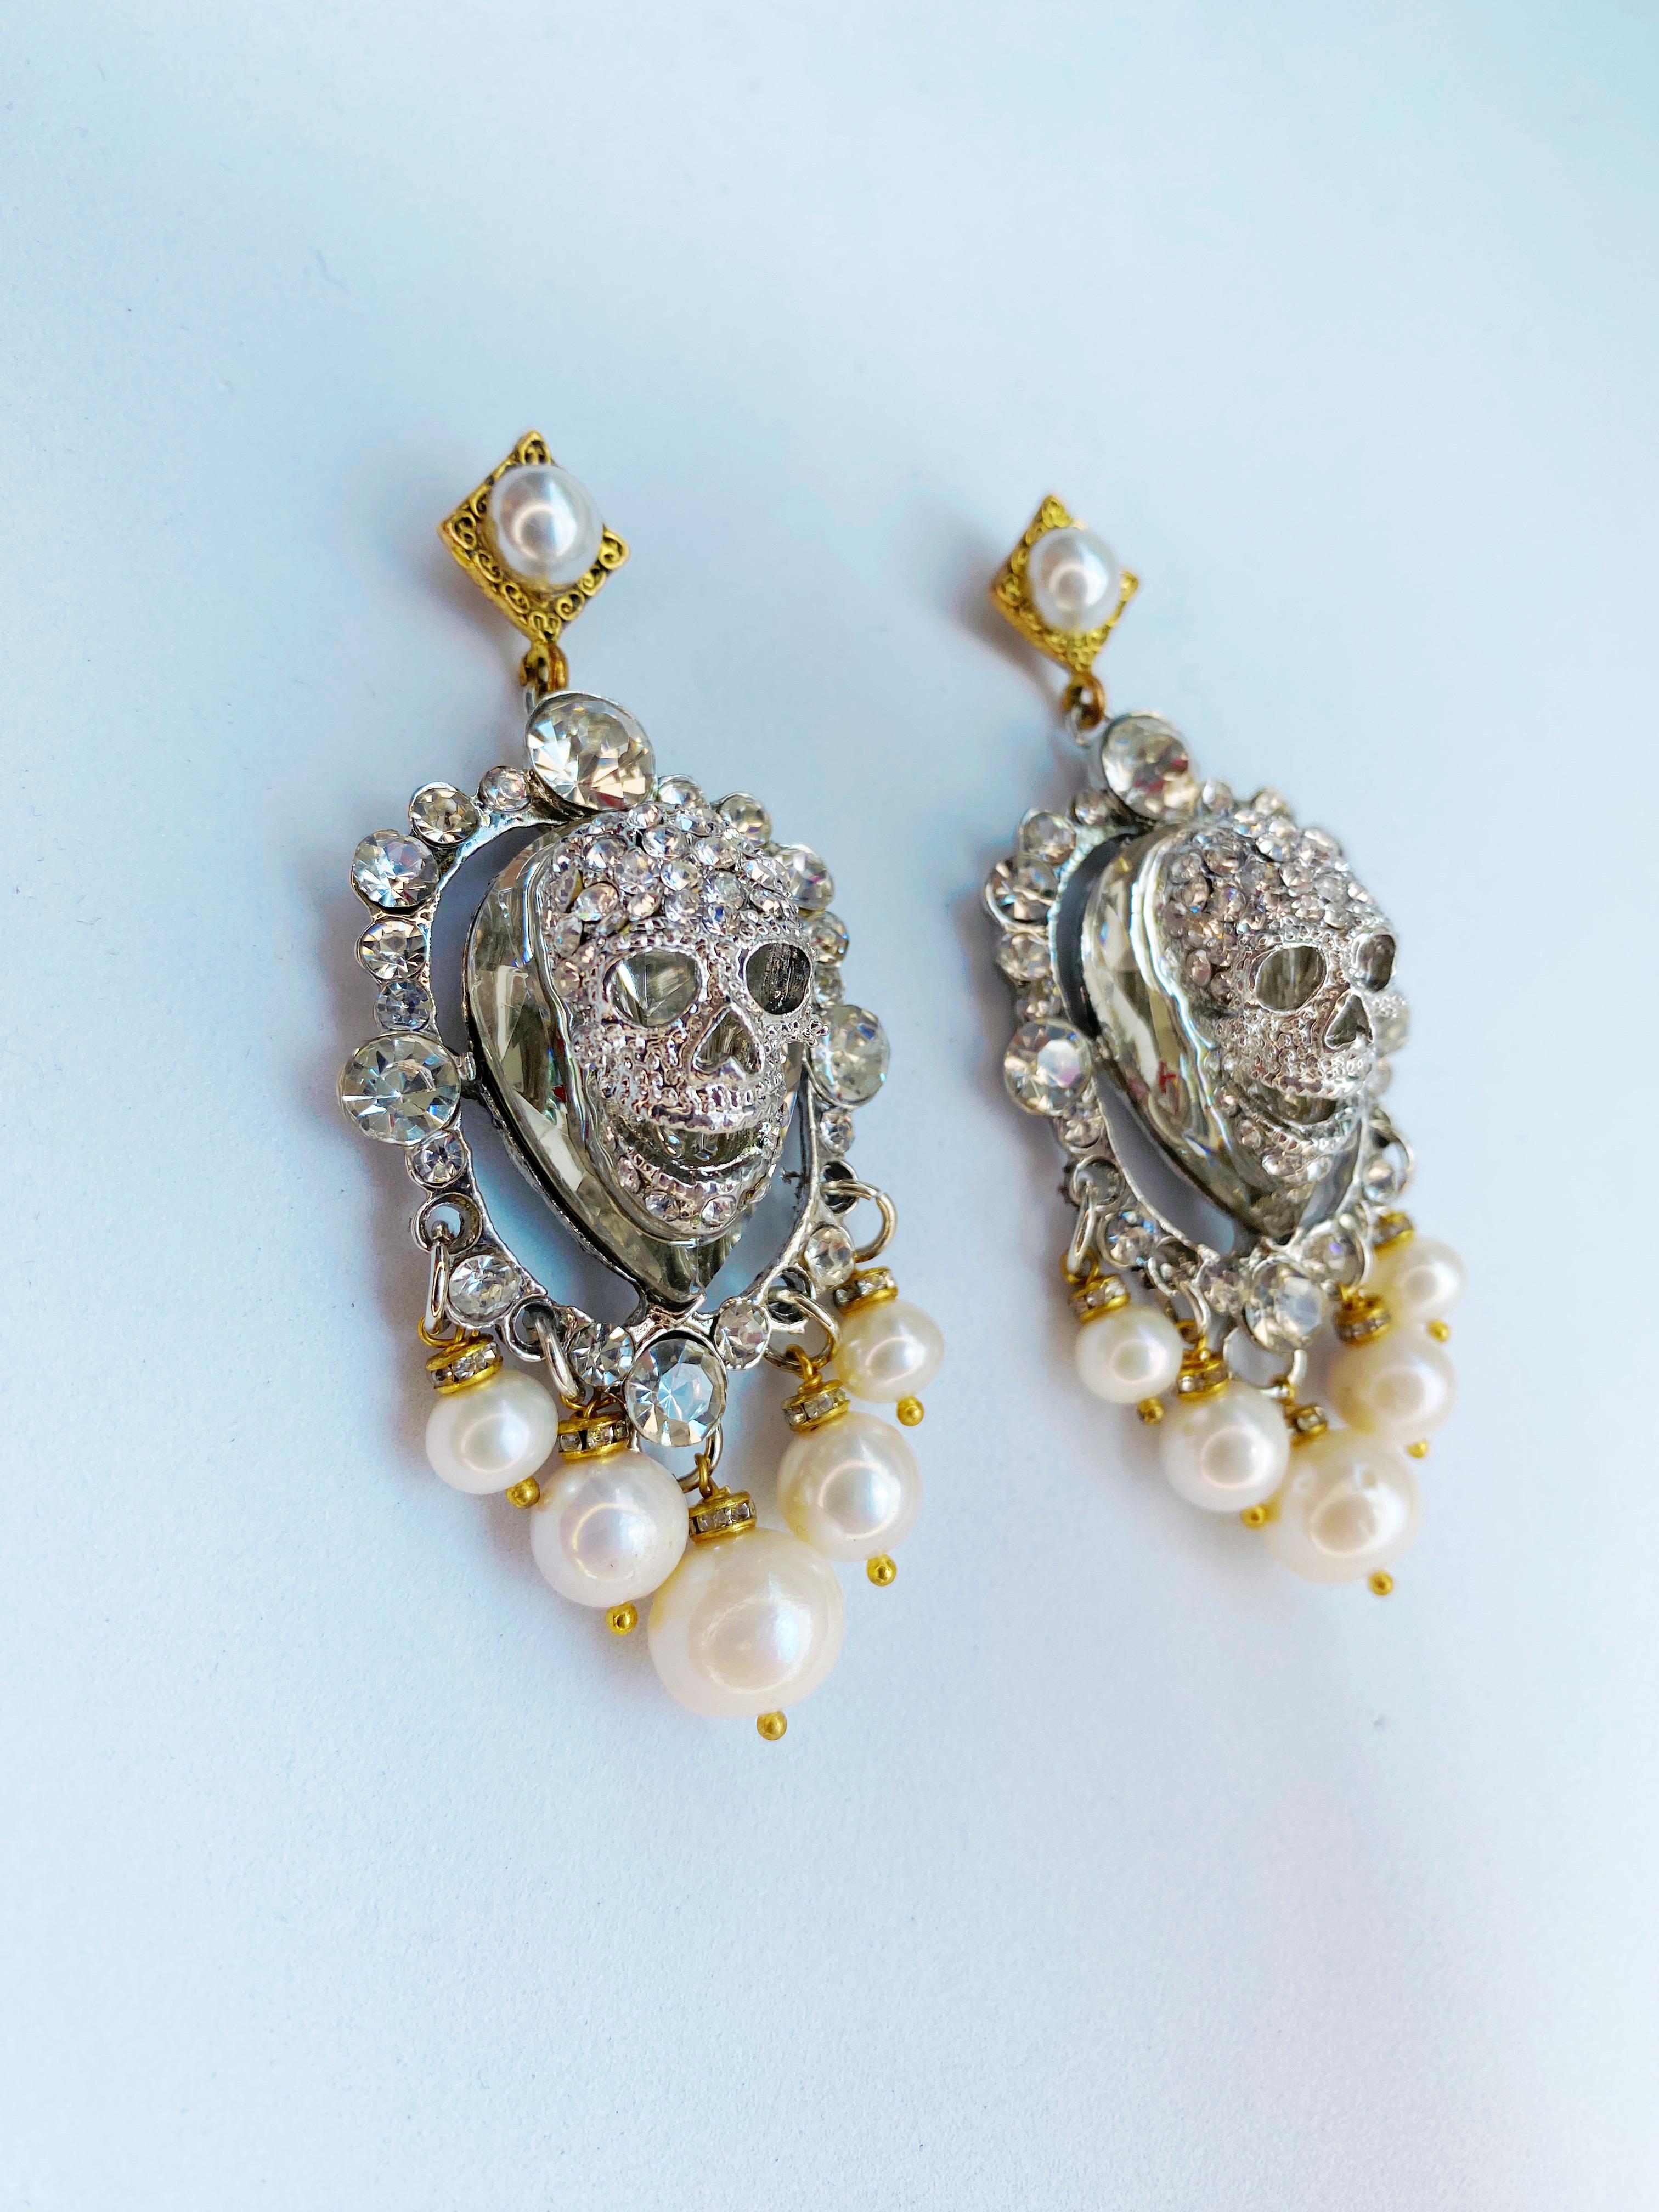 These stunning Louis XIV inspired earrings by Sebastian Jaramillo feature Swarovski crystals and freshwater pearls. Elegant yet edgy enough to stand out in the crowd.